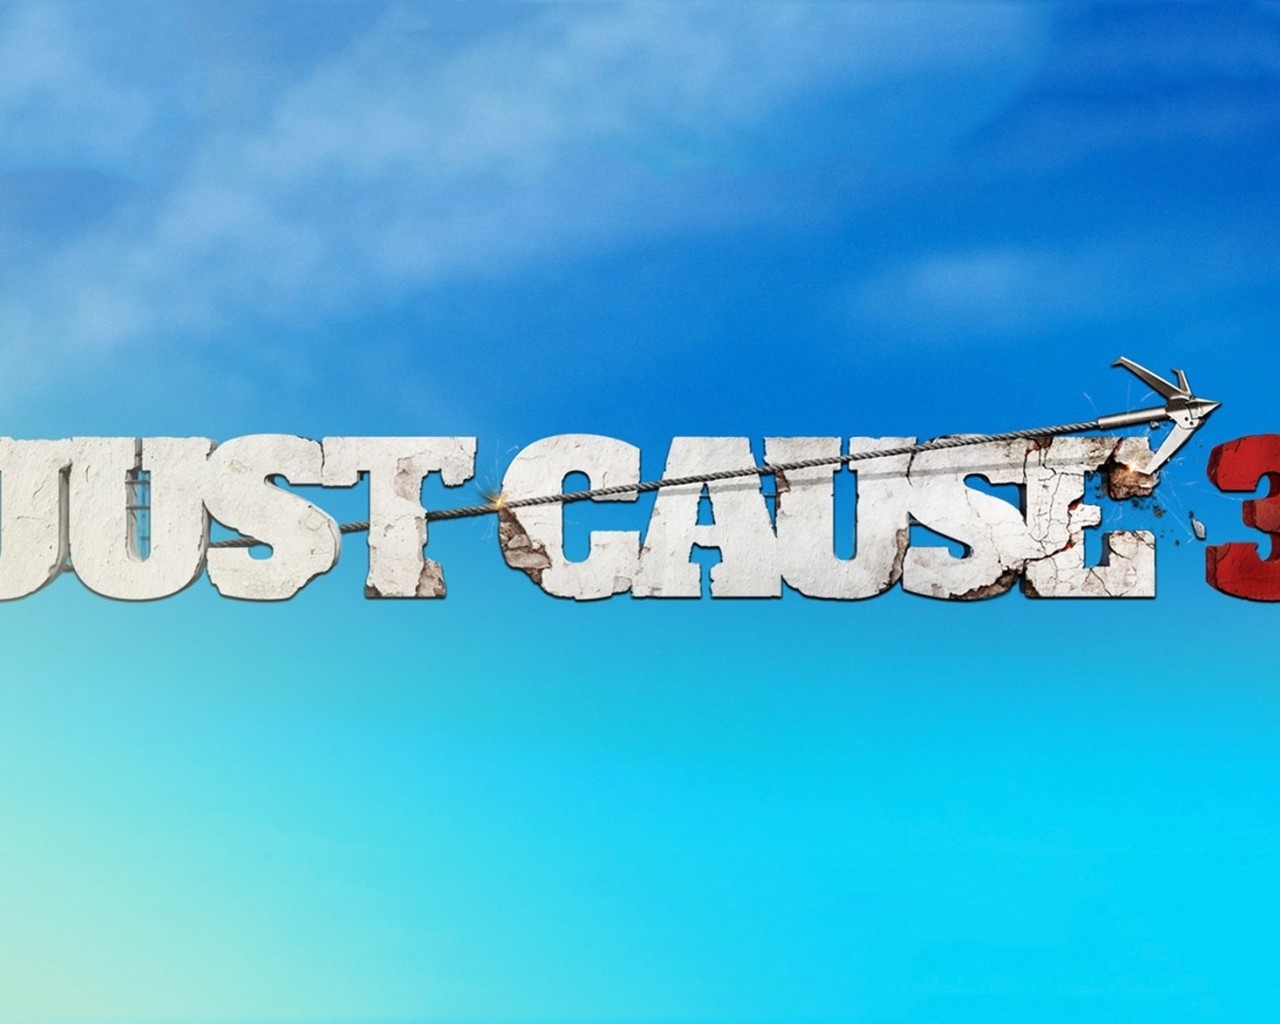 Just Cause 3 Poster for 1280 x 1024 resolution